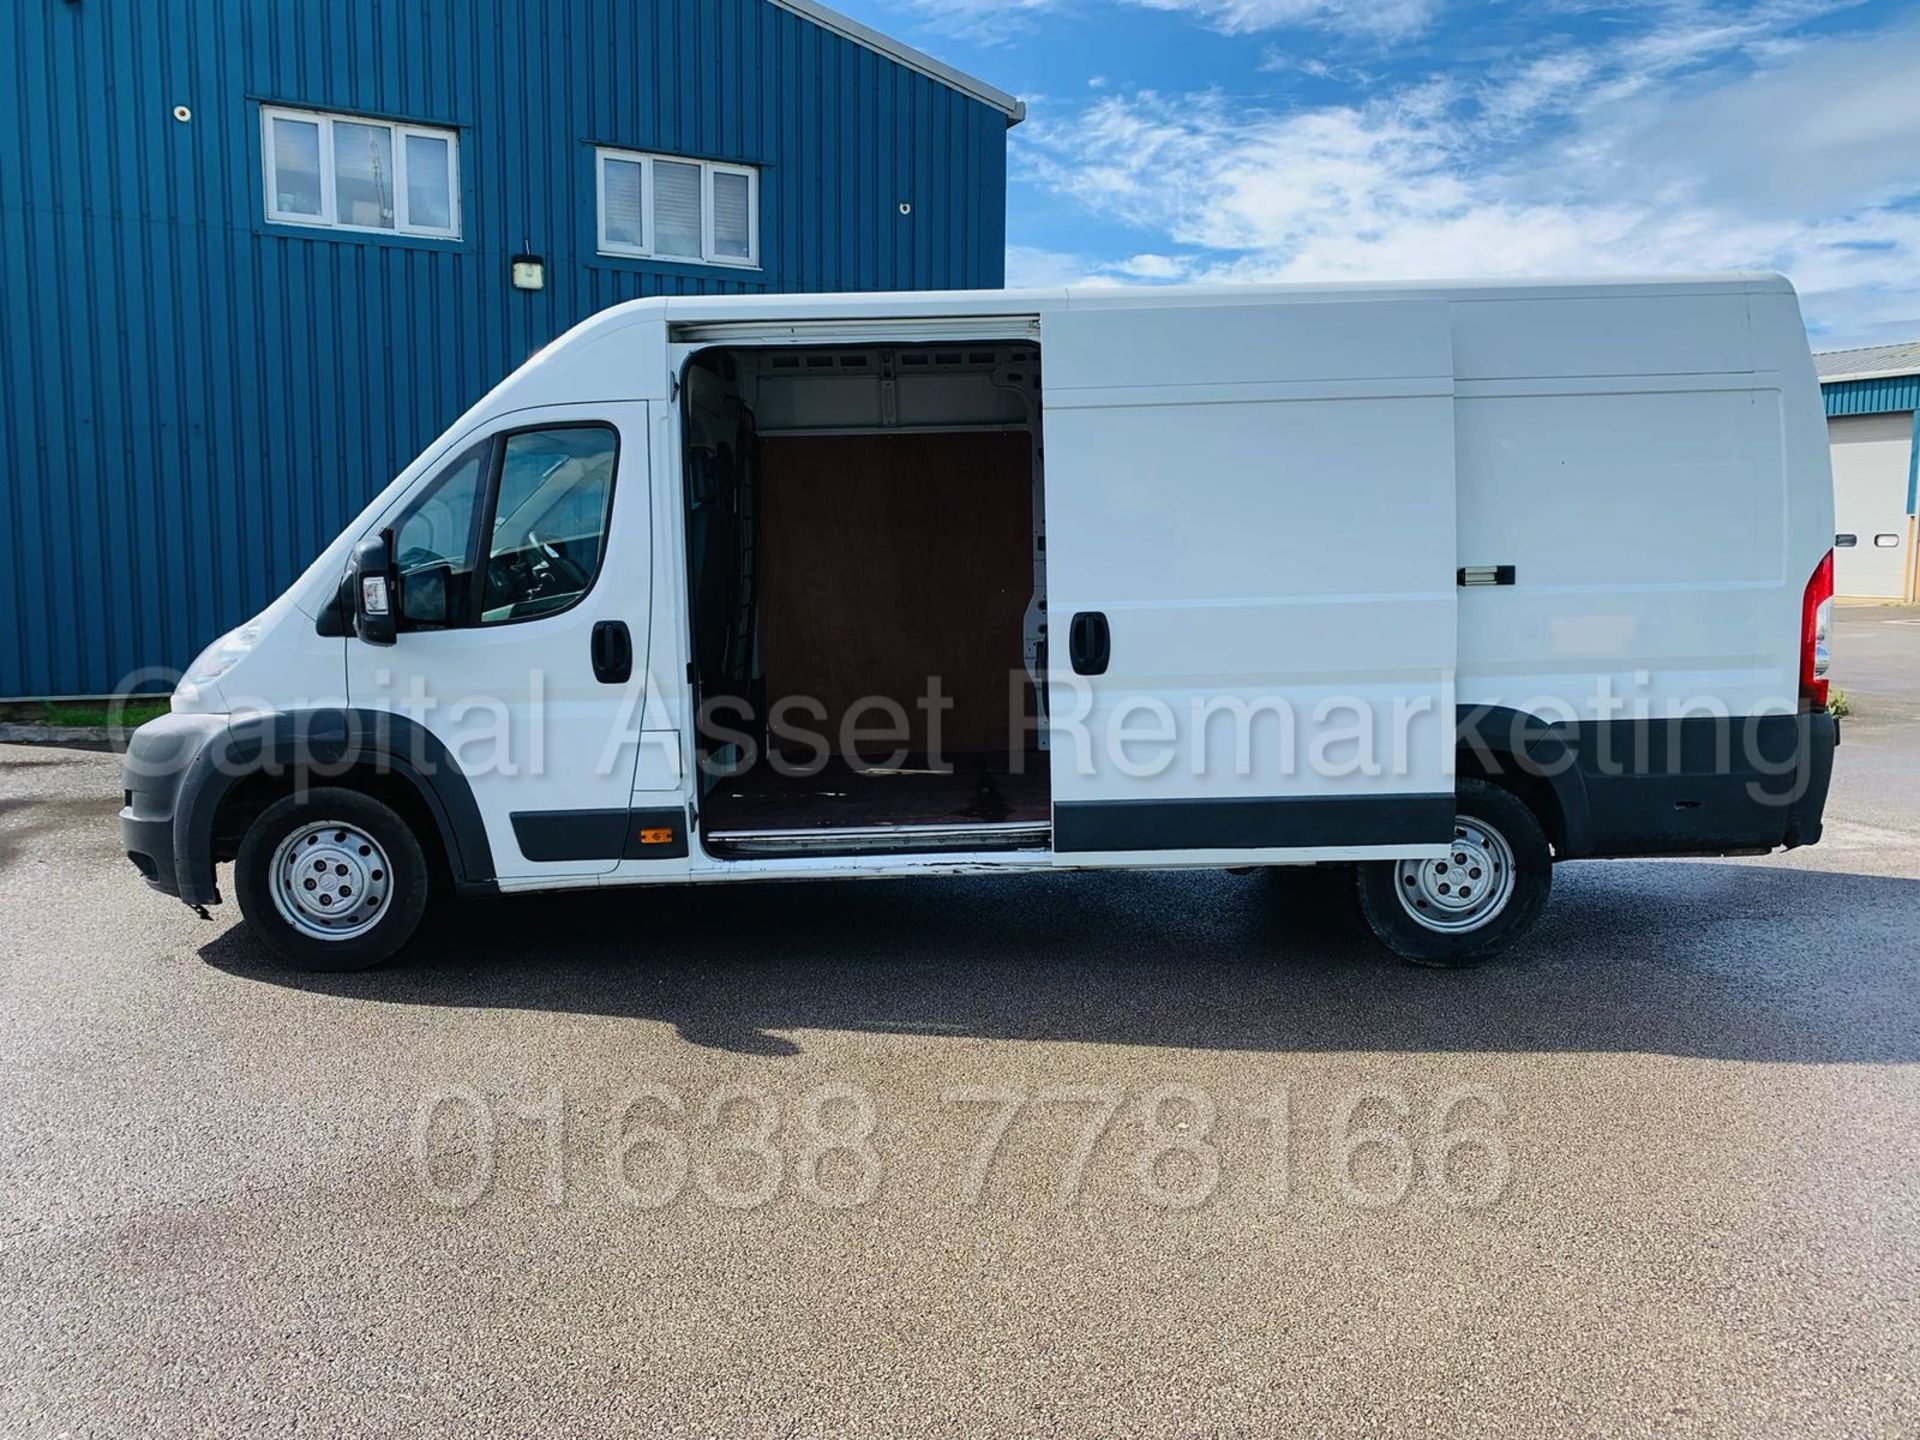 CITROEN RELAY 'L4 EXTRA LWB HI-ROOF' (2012) '2.2 HDI - 130 BHP - 6 SPEED' **LOW MILES** - Image 13 of 21